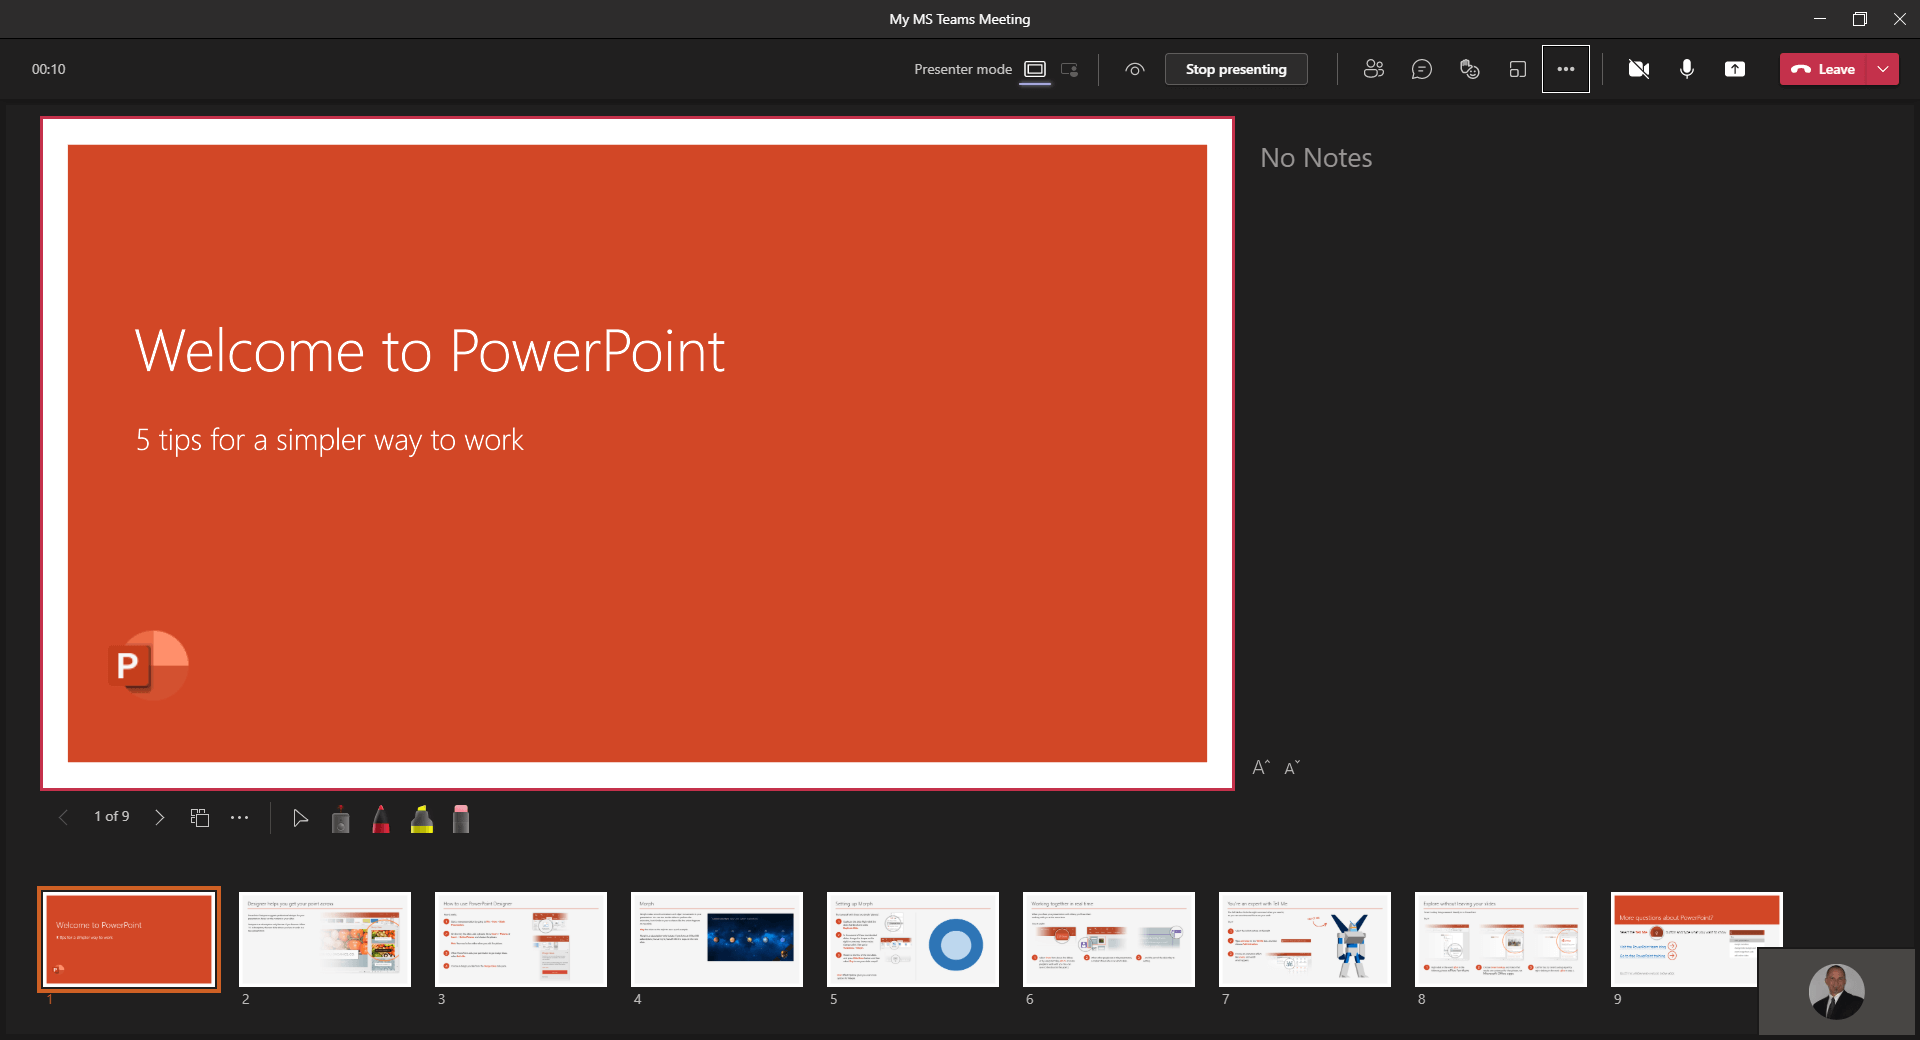 powerpoint Presentation is now presented in PowerPoint live